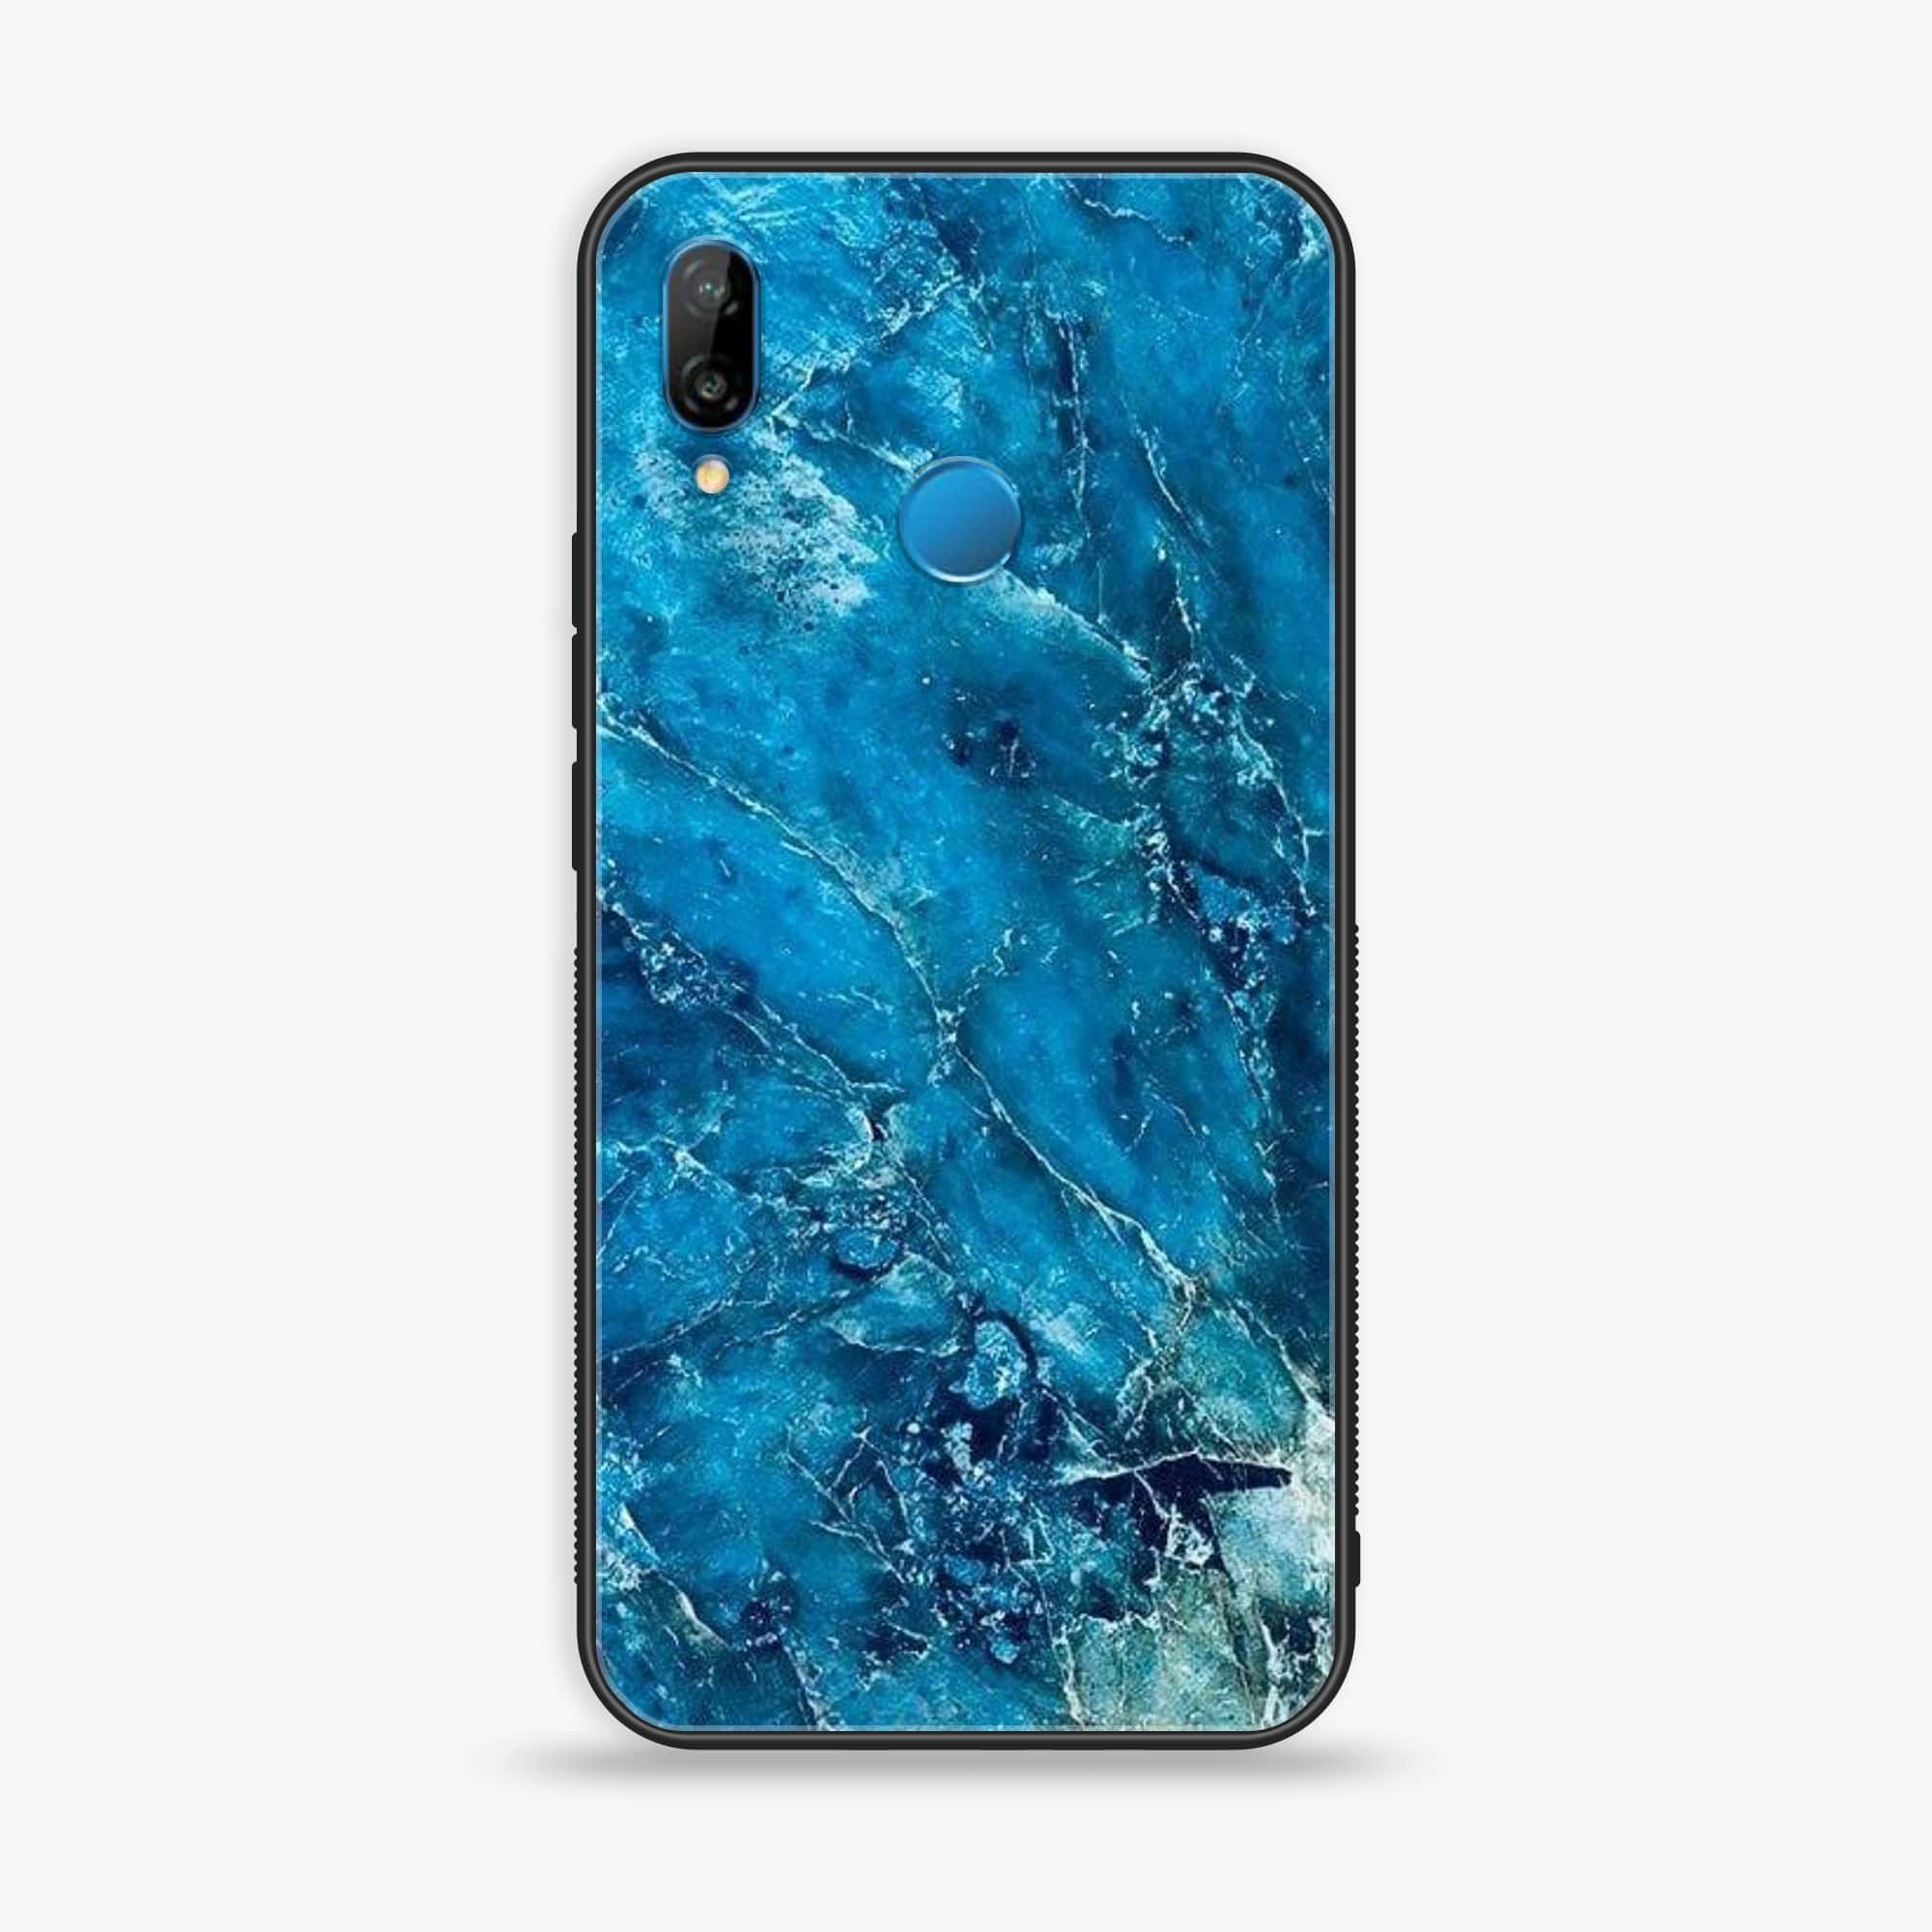 Huawei Y9 (2019) - Blue Marble Series V 2.0 - Premium Printed Glass soft Bumper shock Proof Case